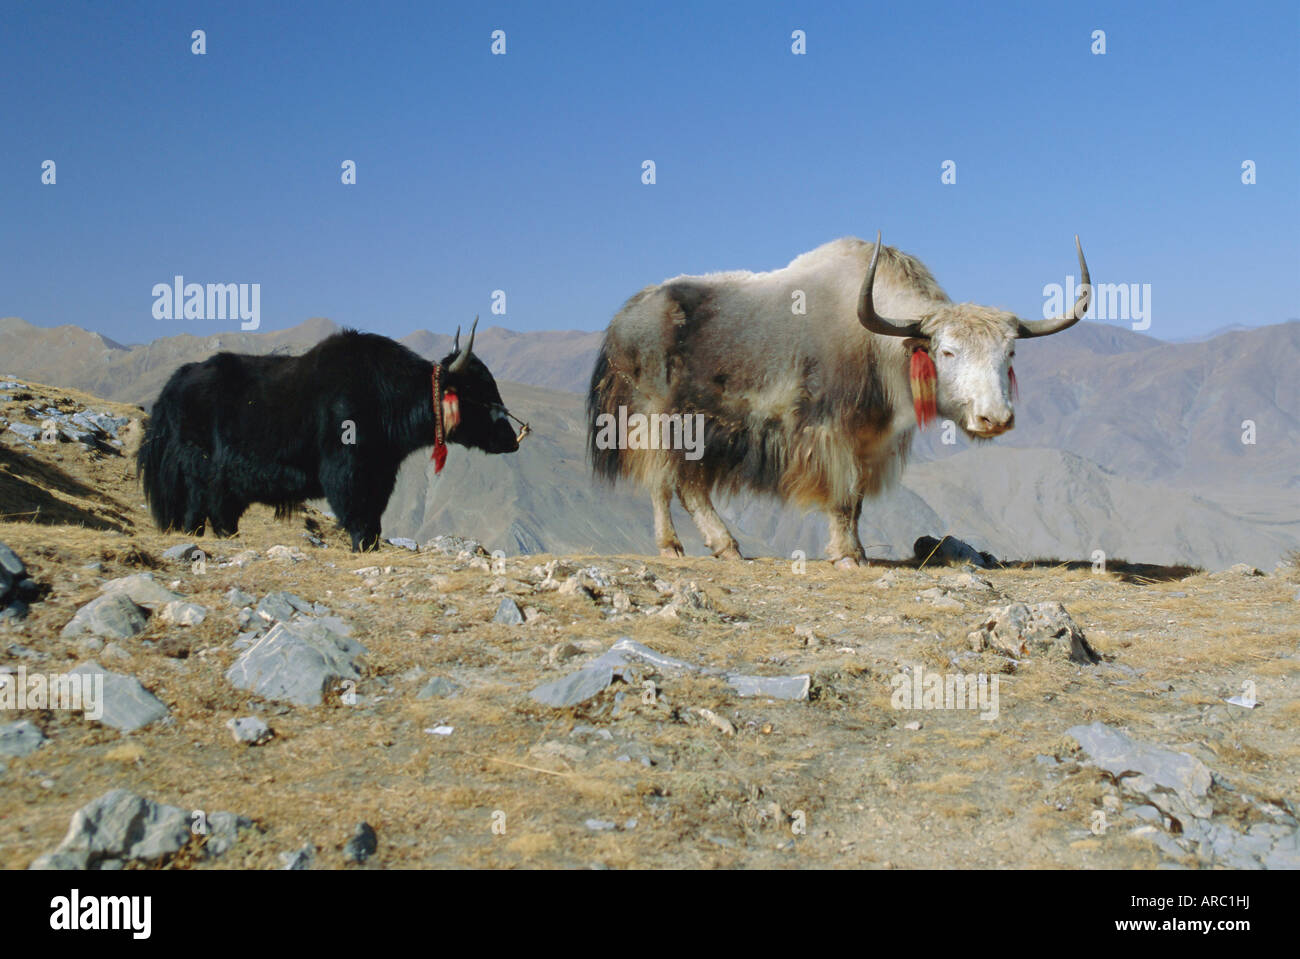 Two yaks in the mountains, Tibet, China Stock Photo